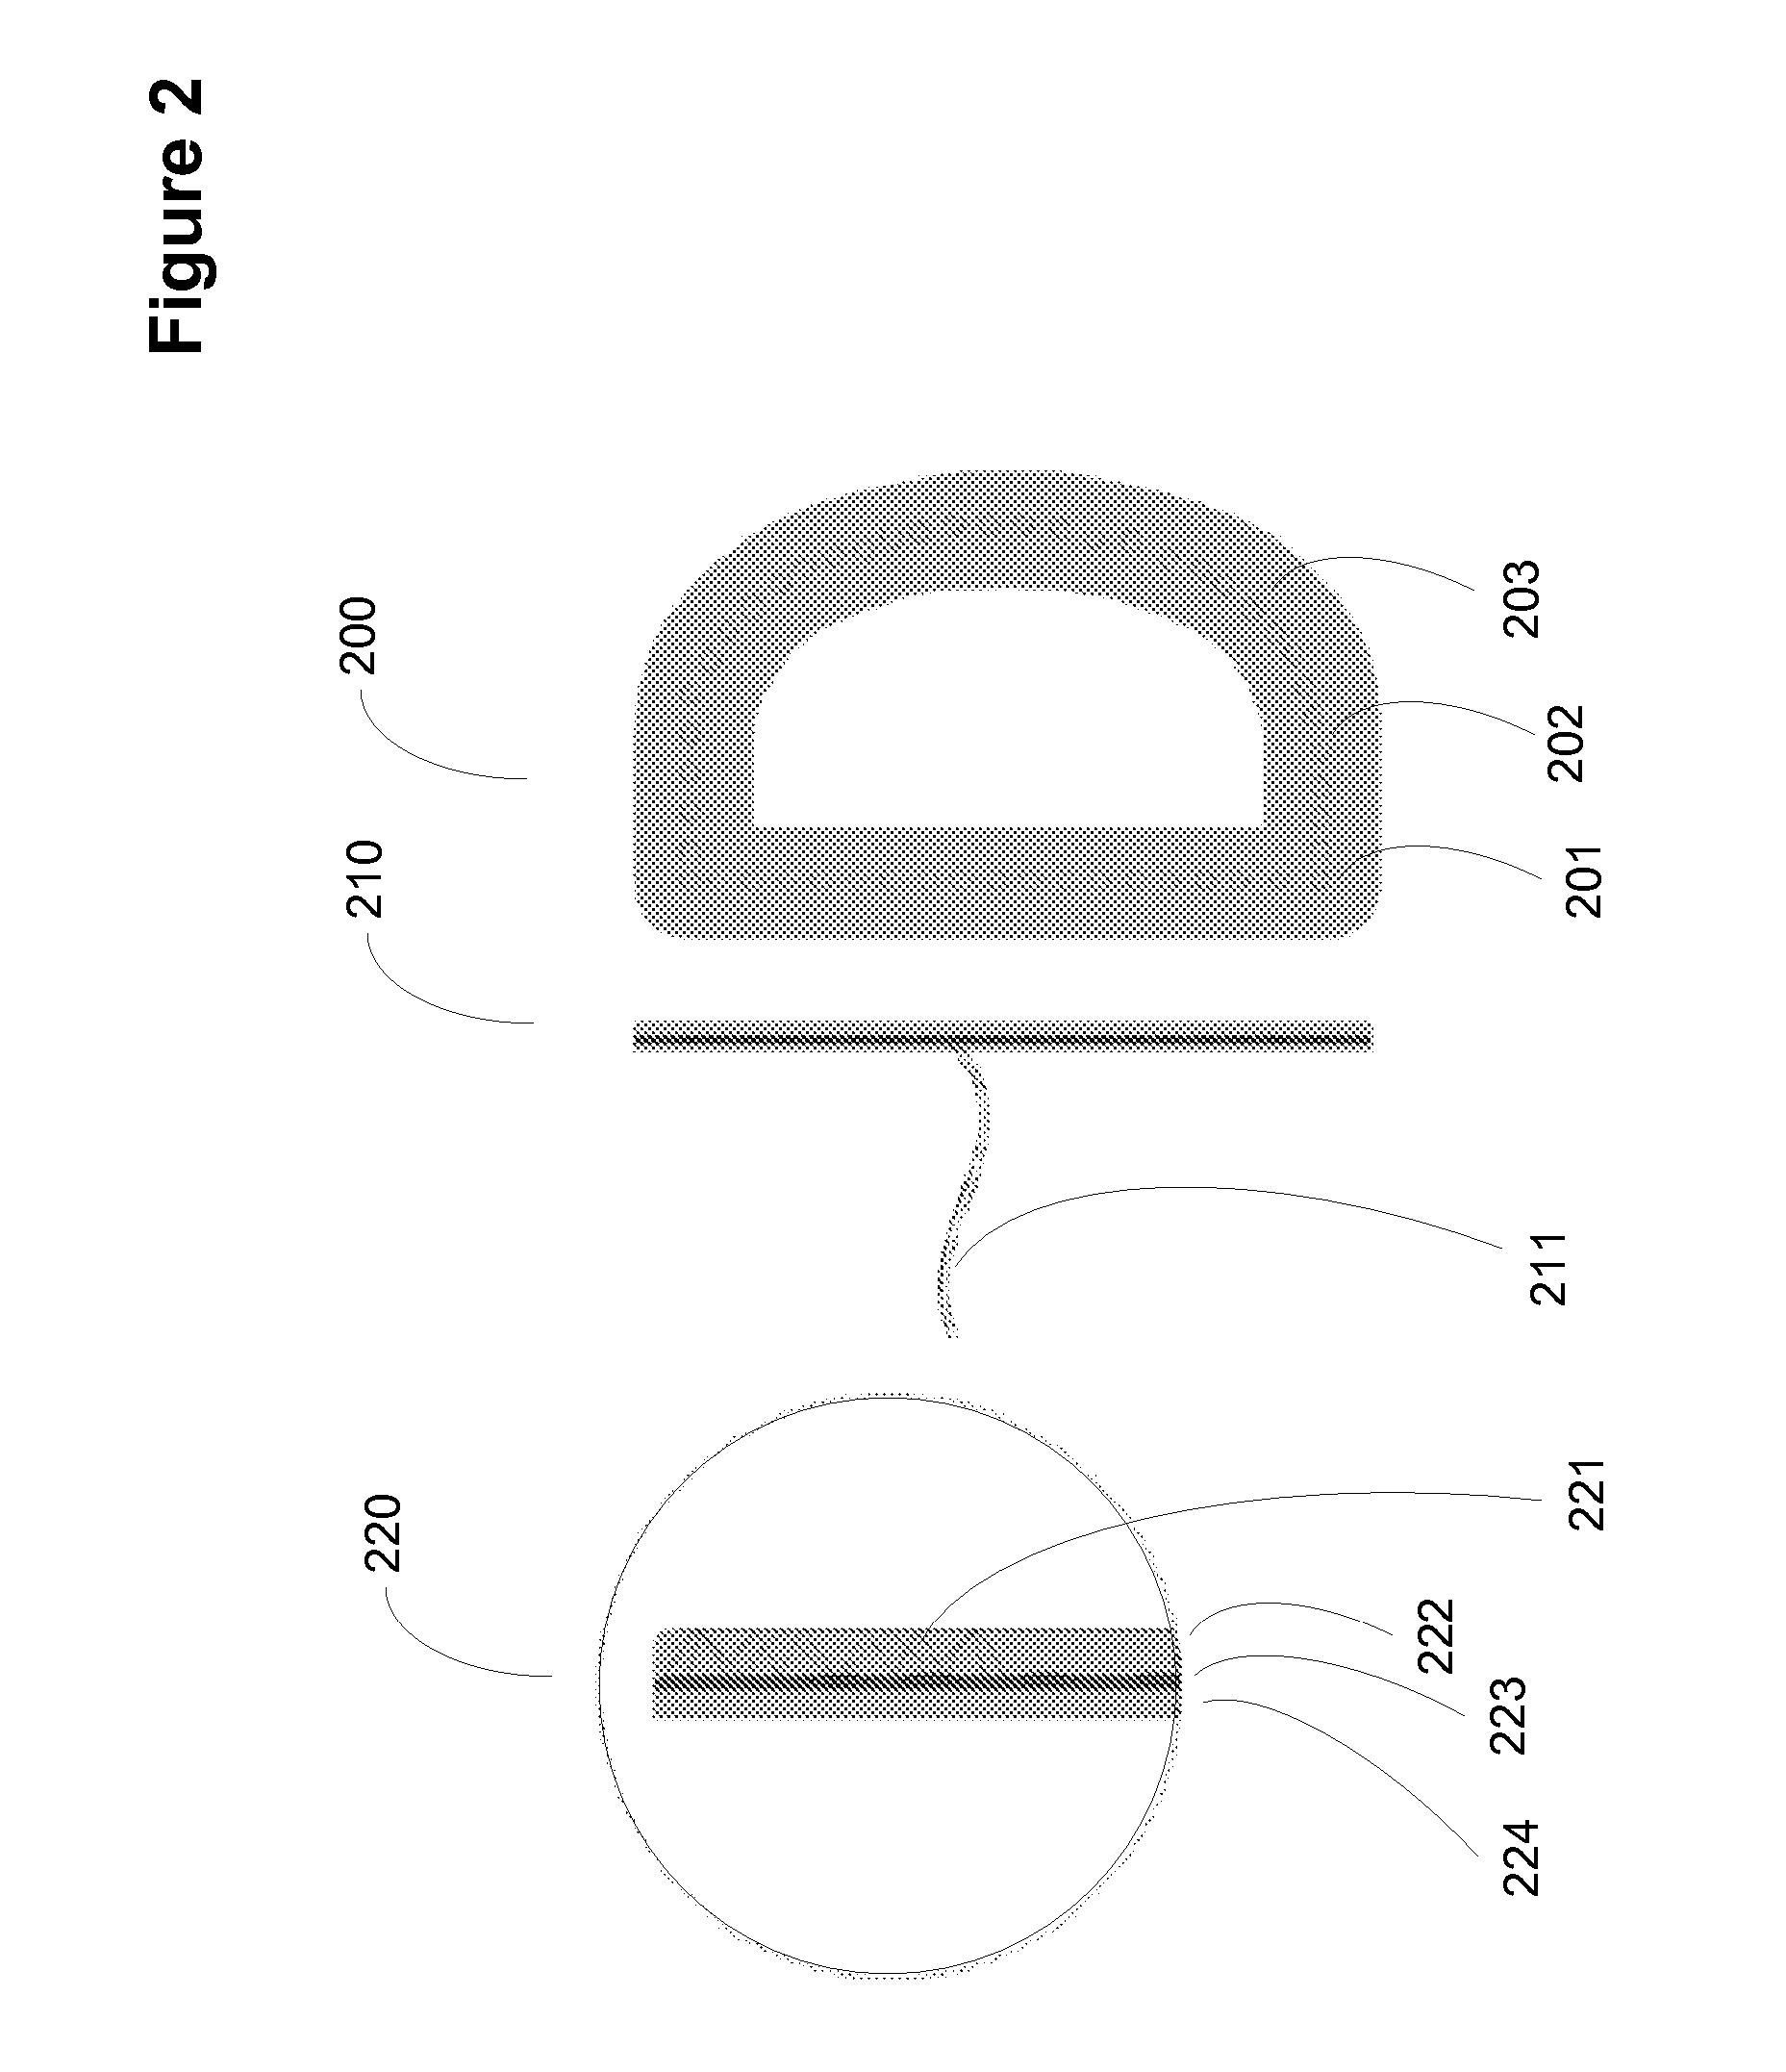 Light emitting diode symbol block apparatus and method for forming non-pixelated signs